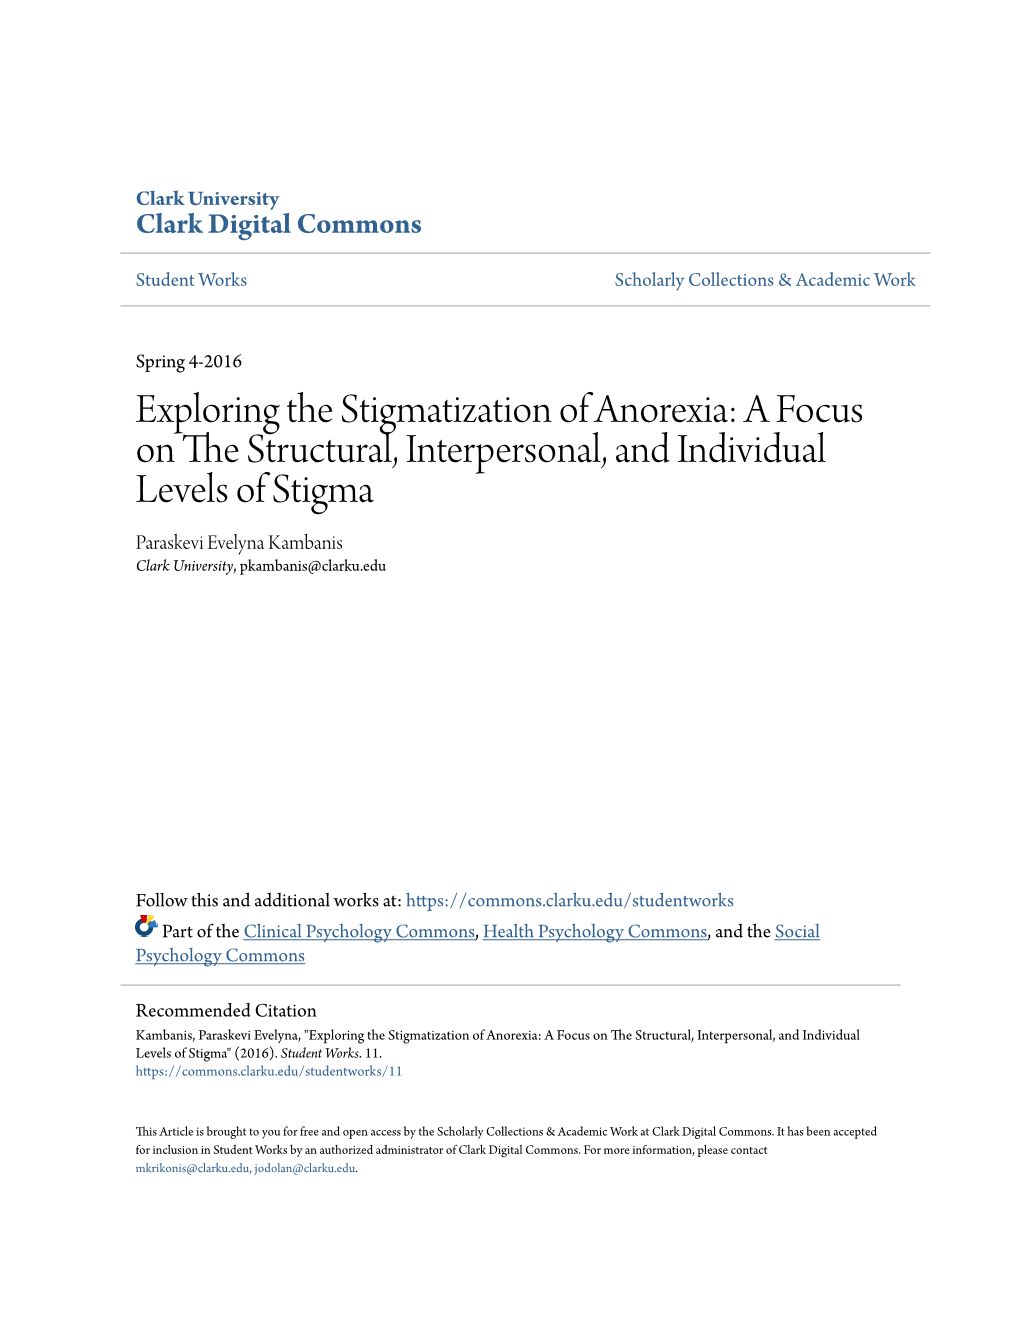 Exploring the Stigmatization of Anorexia: a Focus on the Structural, Interpersonal, And